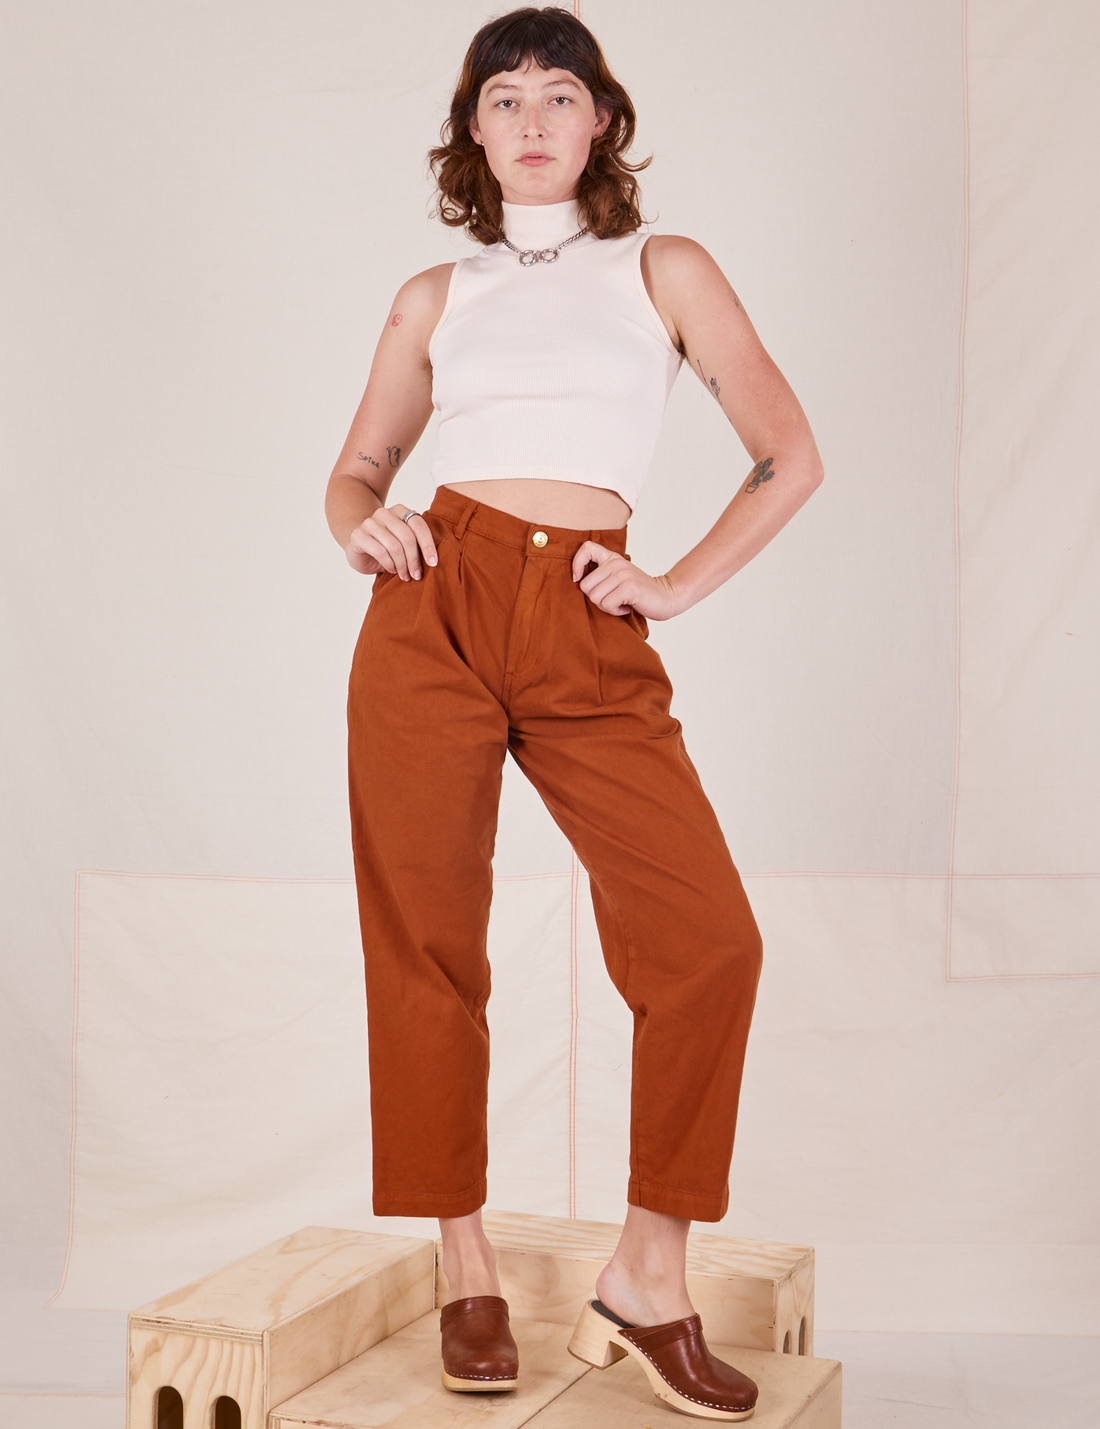 Alex is wearing Heavyweight Trousers in Burnt Terracotta and vintage off-white Sleeveless Turtleneck